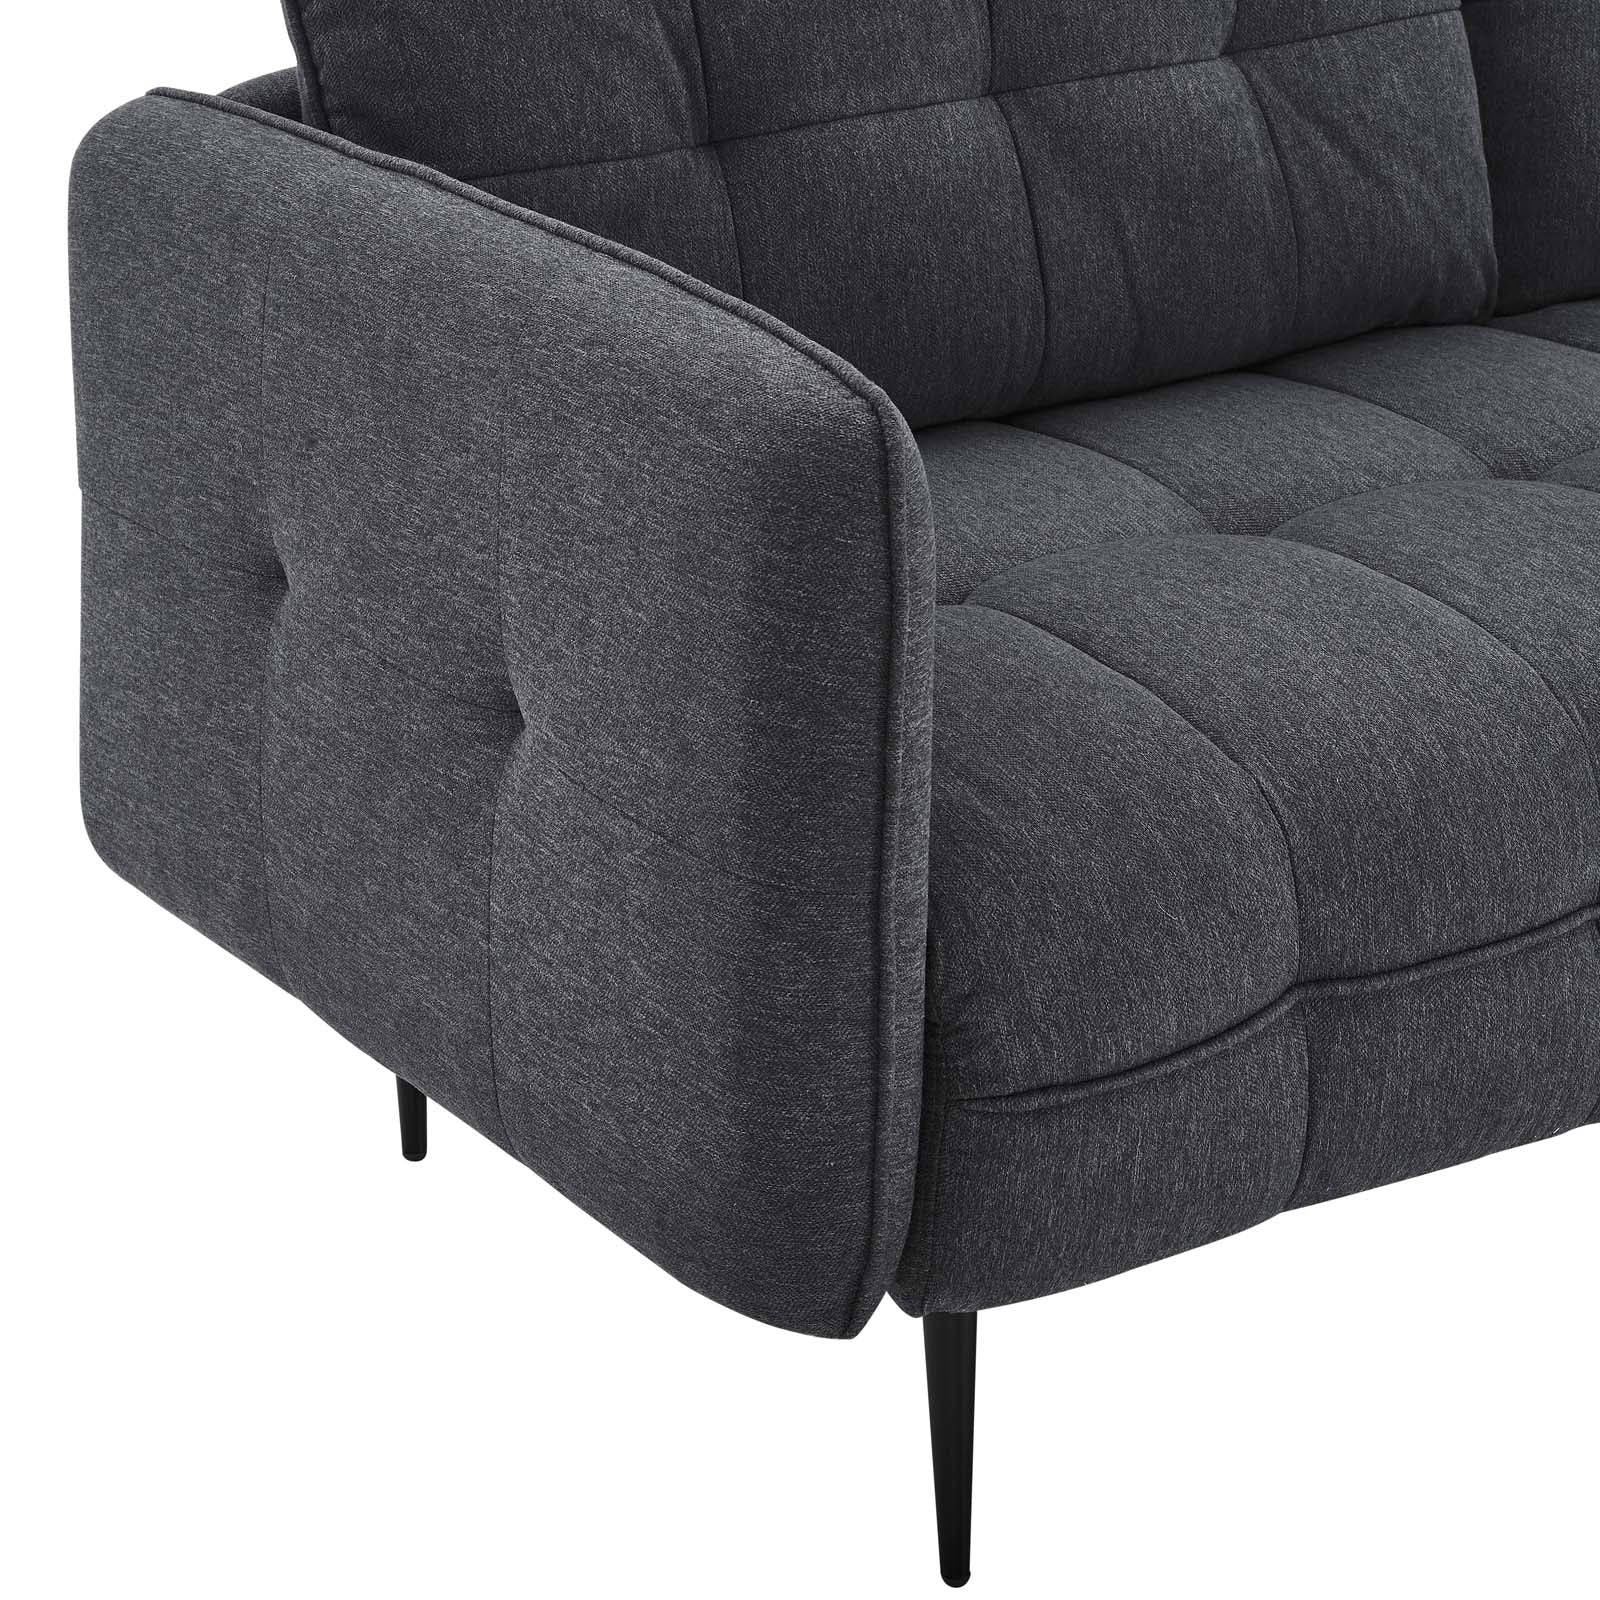 Modway Sofas & Couches - Cameron Tufted Fabric Sofa Charcoal